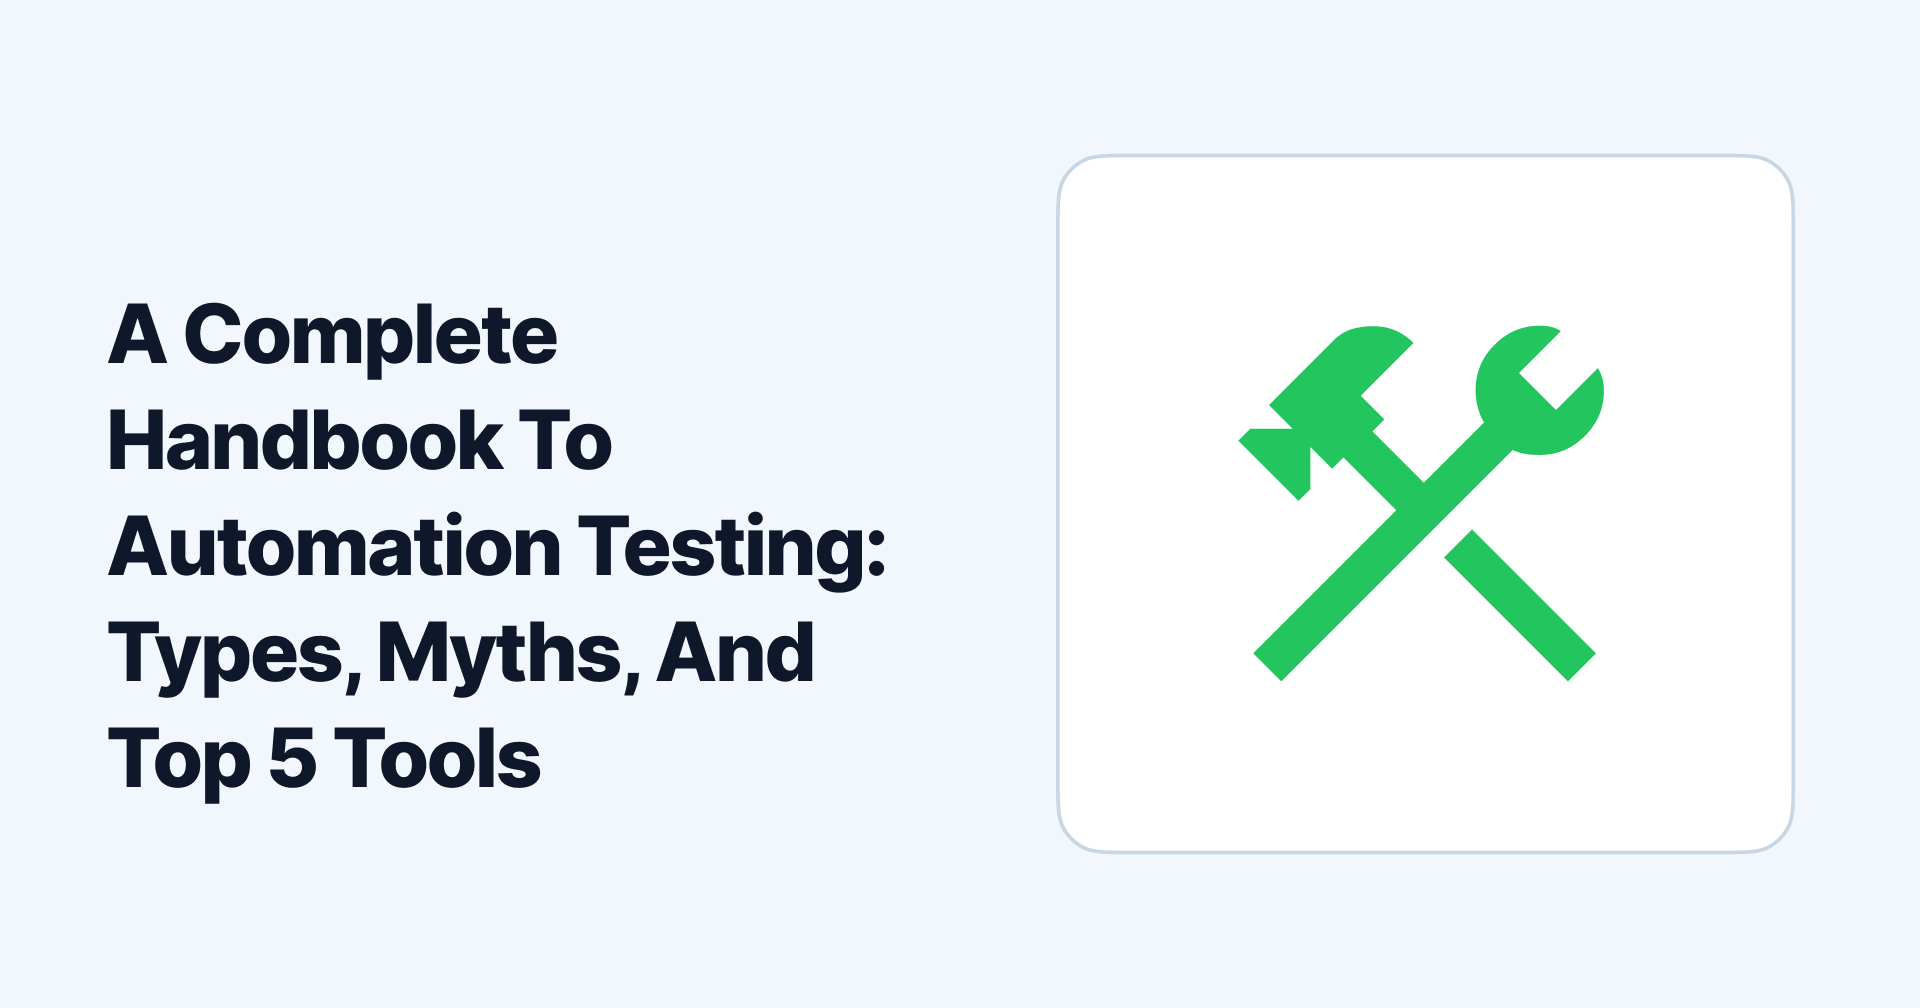 A Complete Handbook To Automation Testing: Types, Myths, And Top 5 Tools